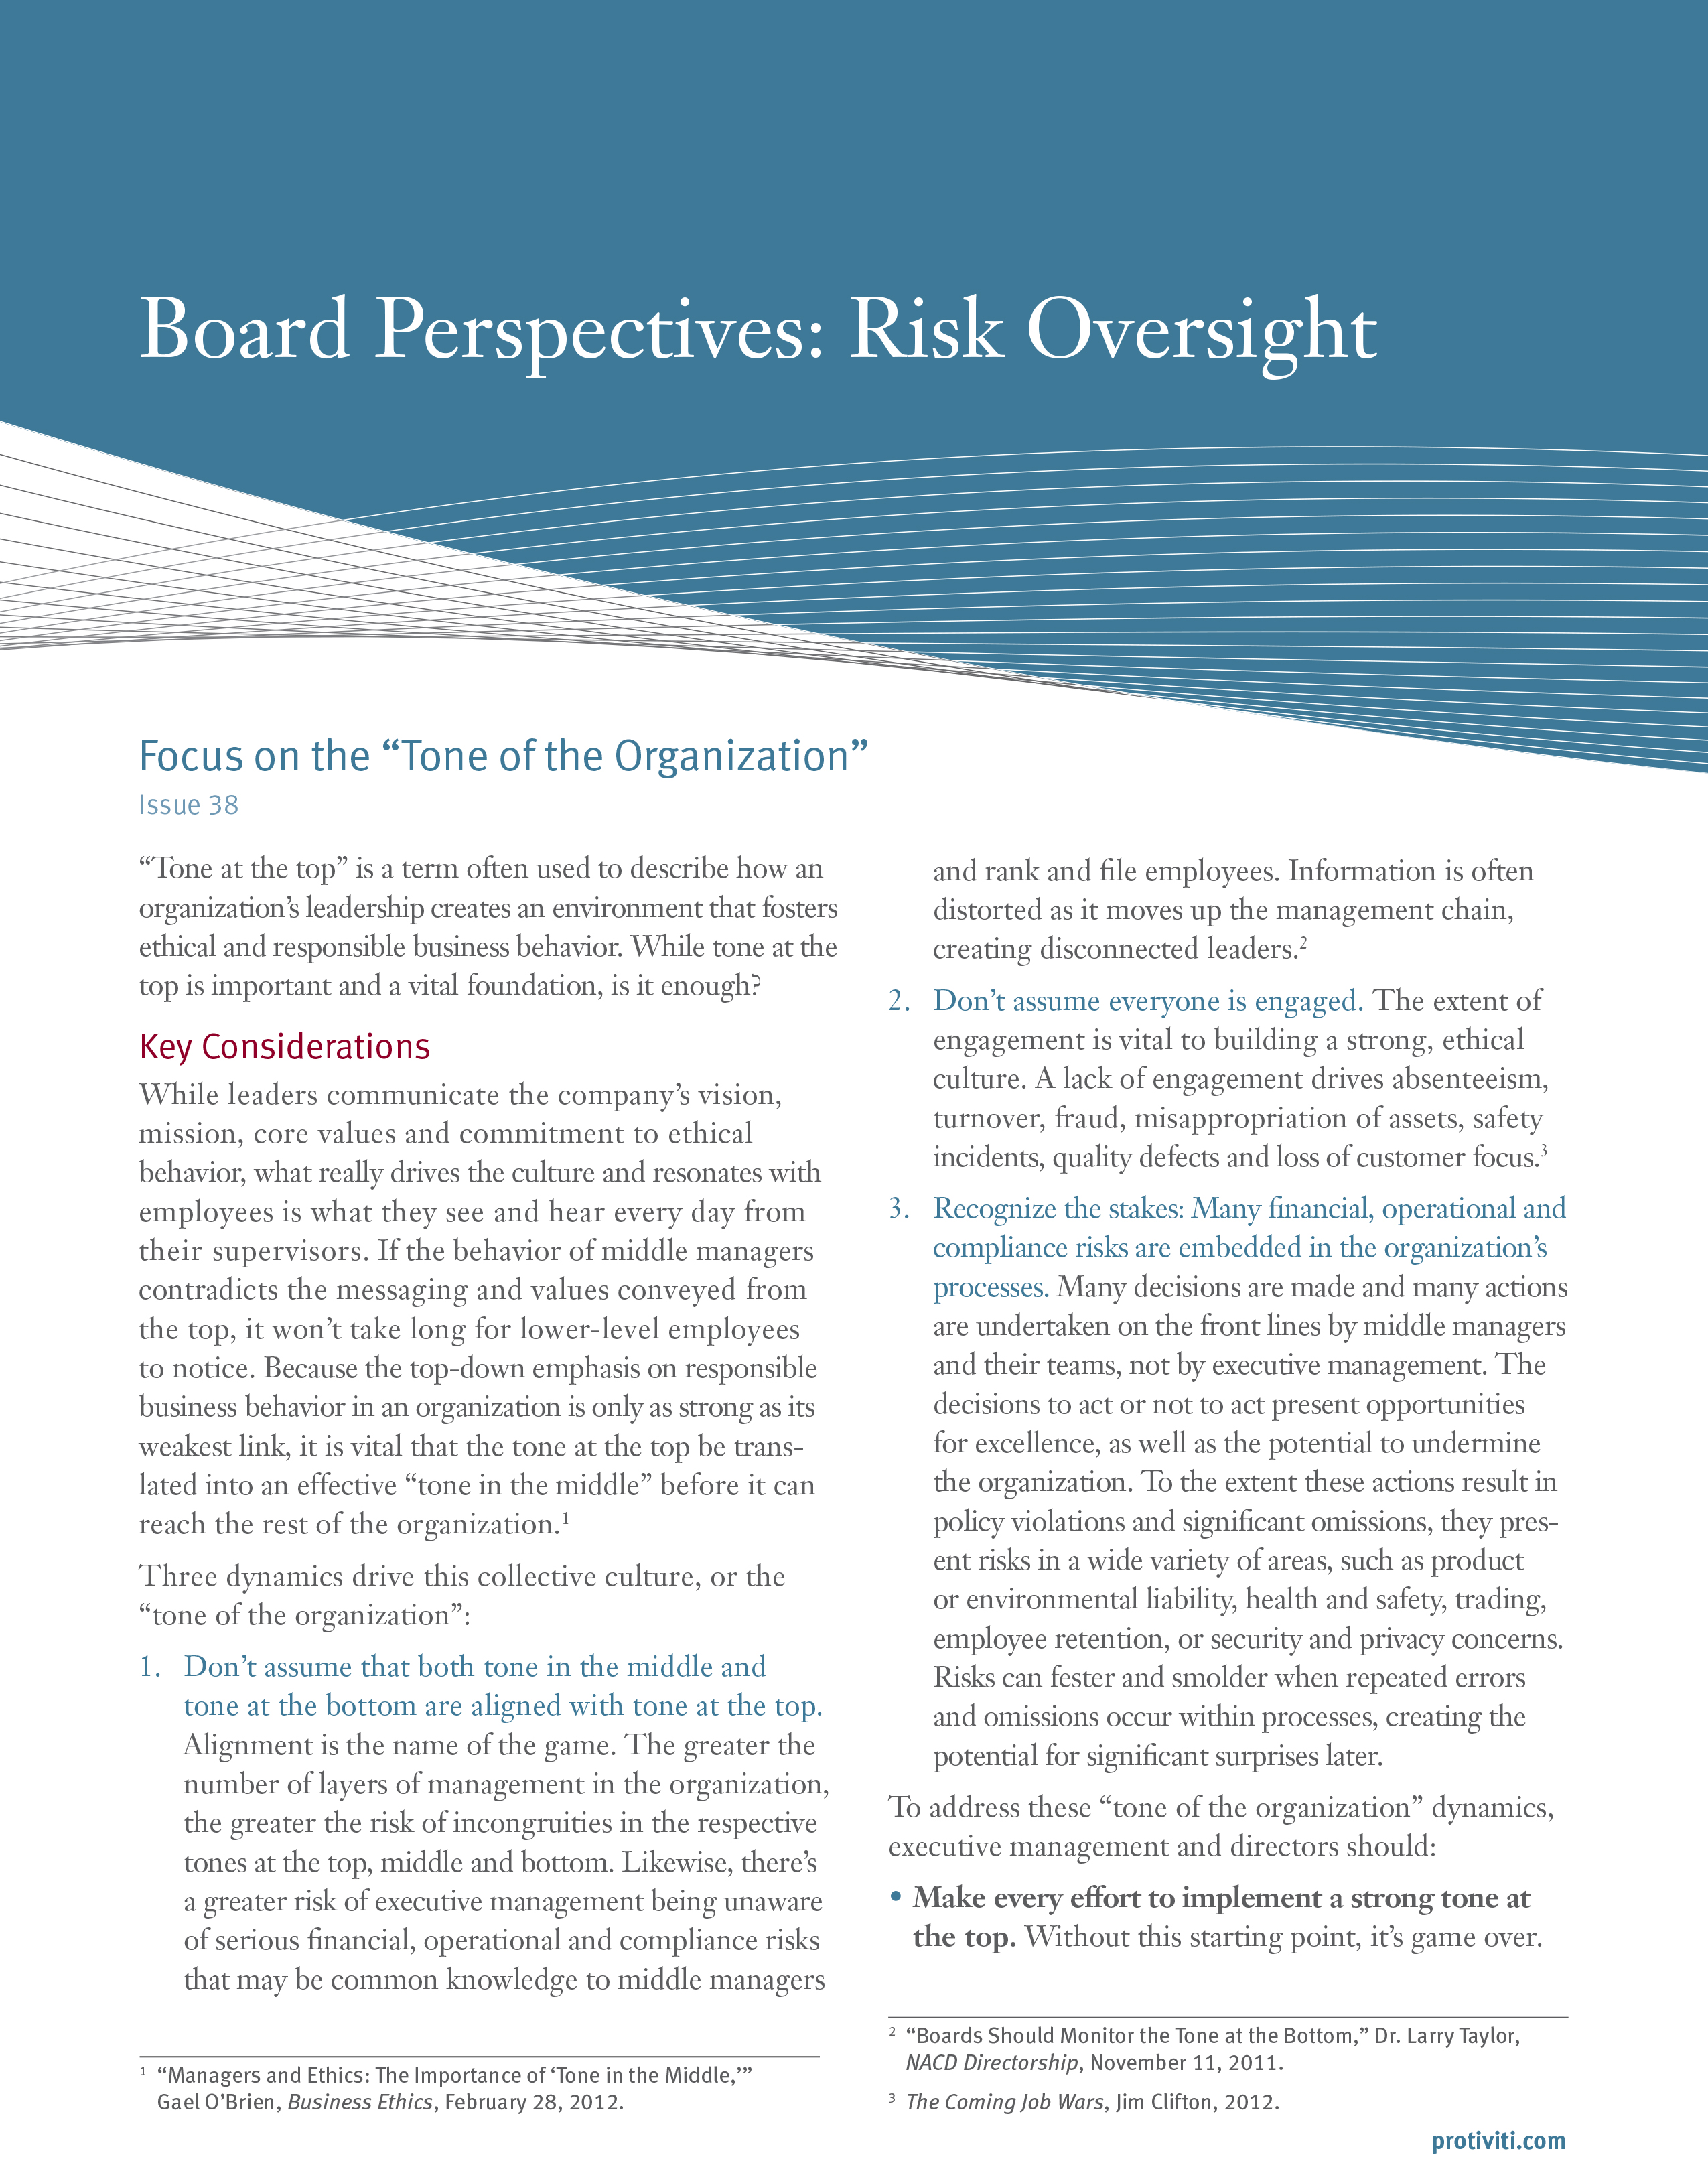 Screenshot of the first page of Focus on the “Tone of the Organization”